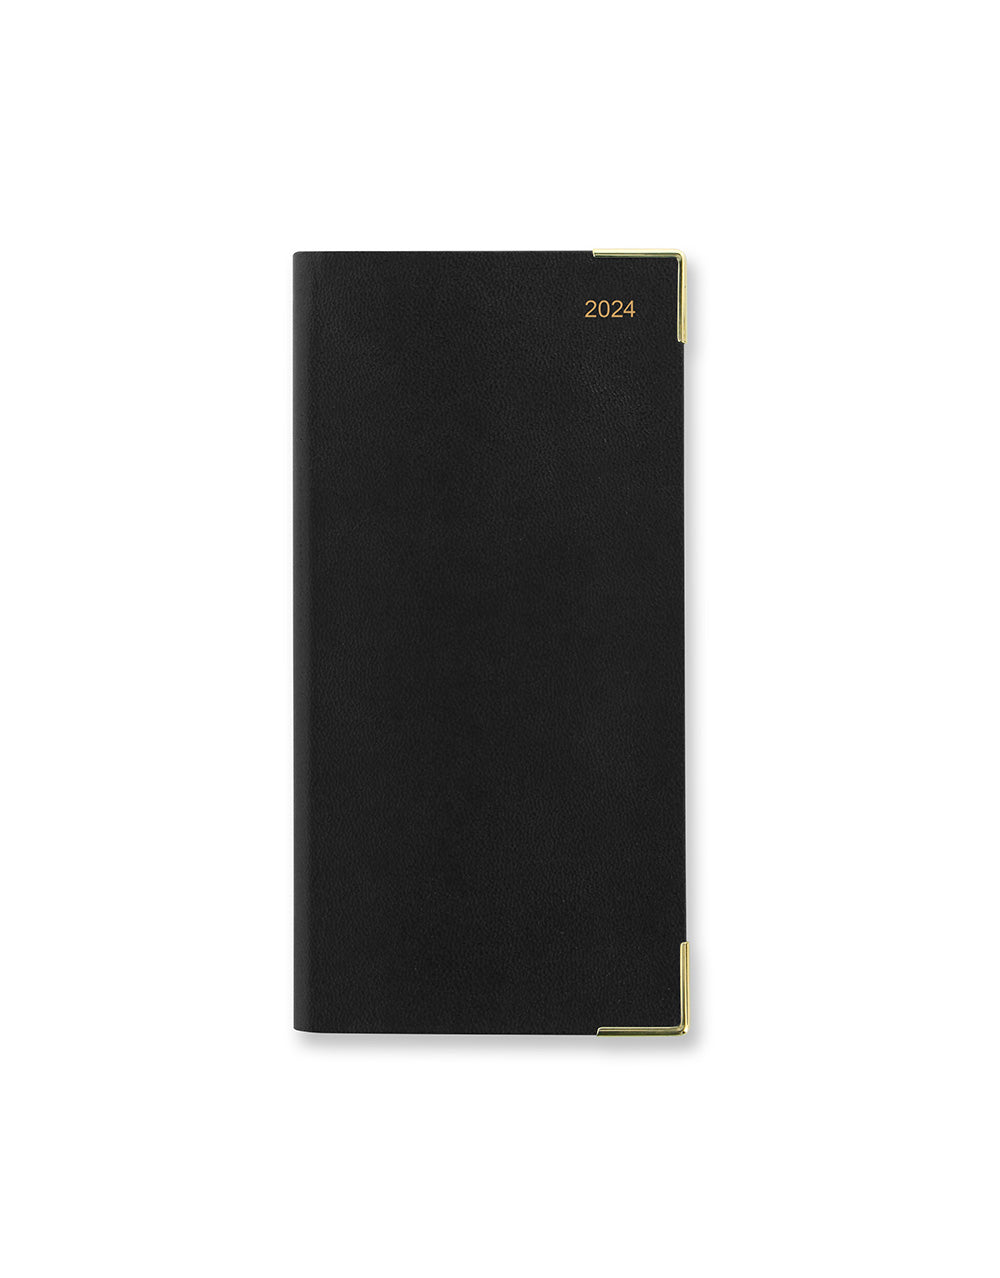 Letts of London 2024 Classic Slim Landscape Week to View Planner - Black